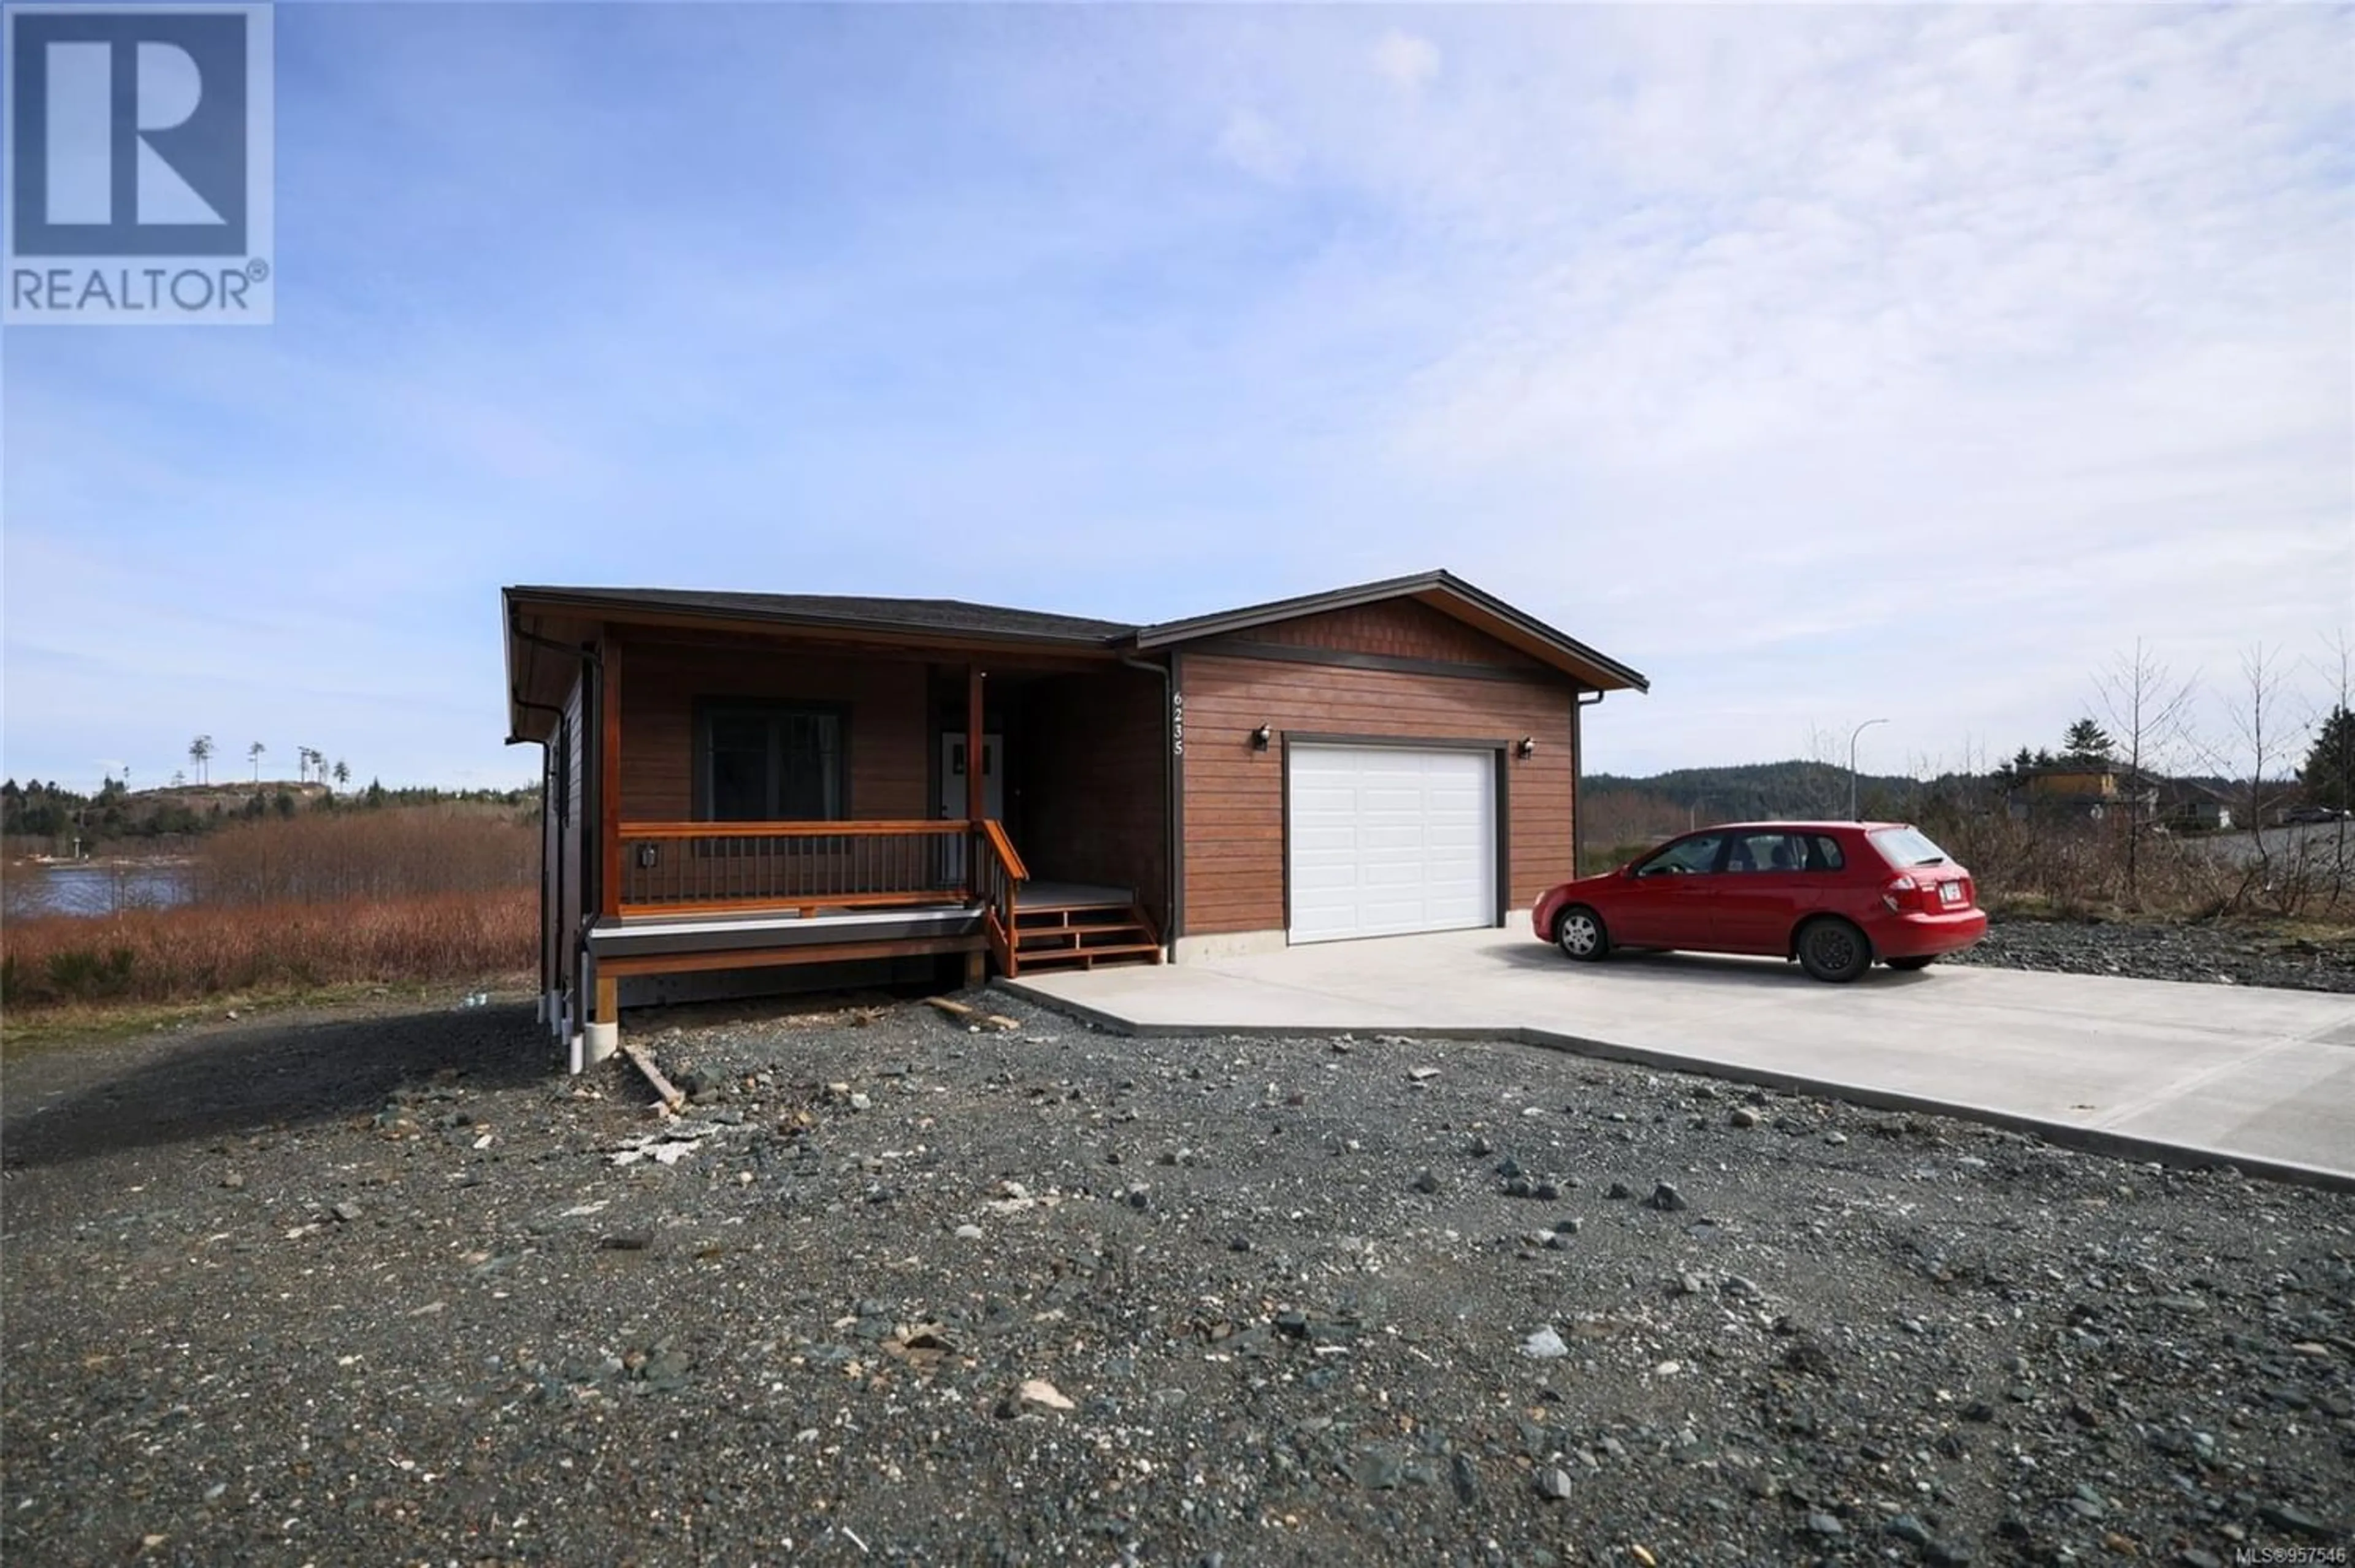 Outside view for 6235 Hunt St, Port Hardy British Columbia V0N2P0